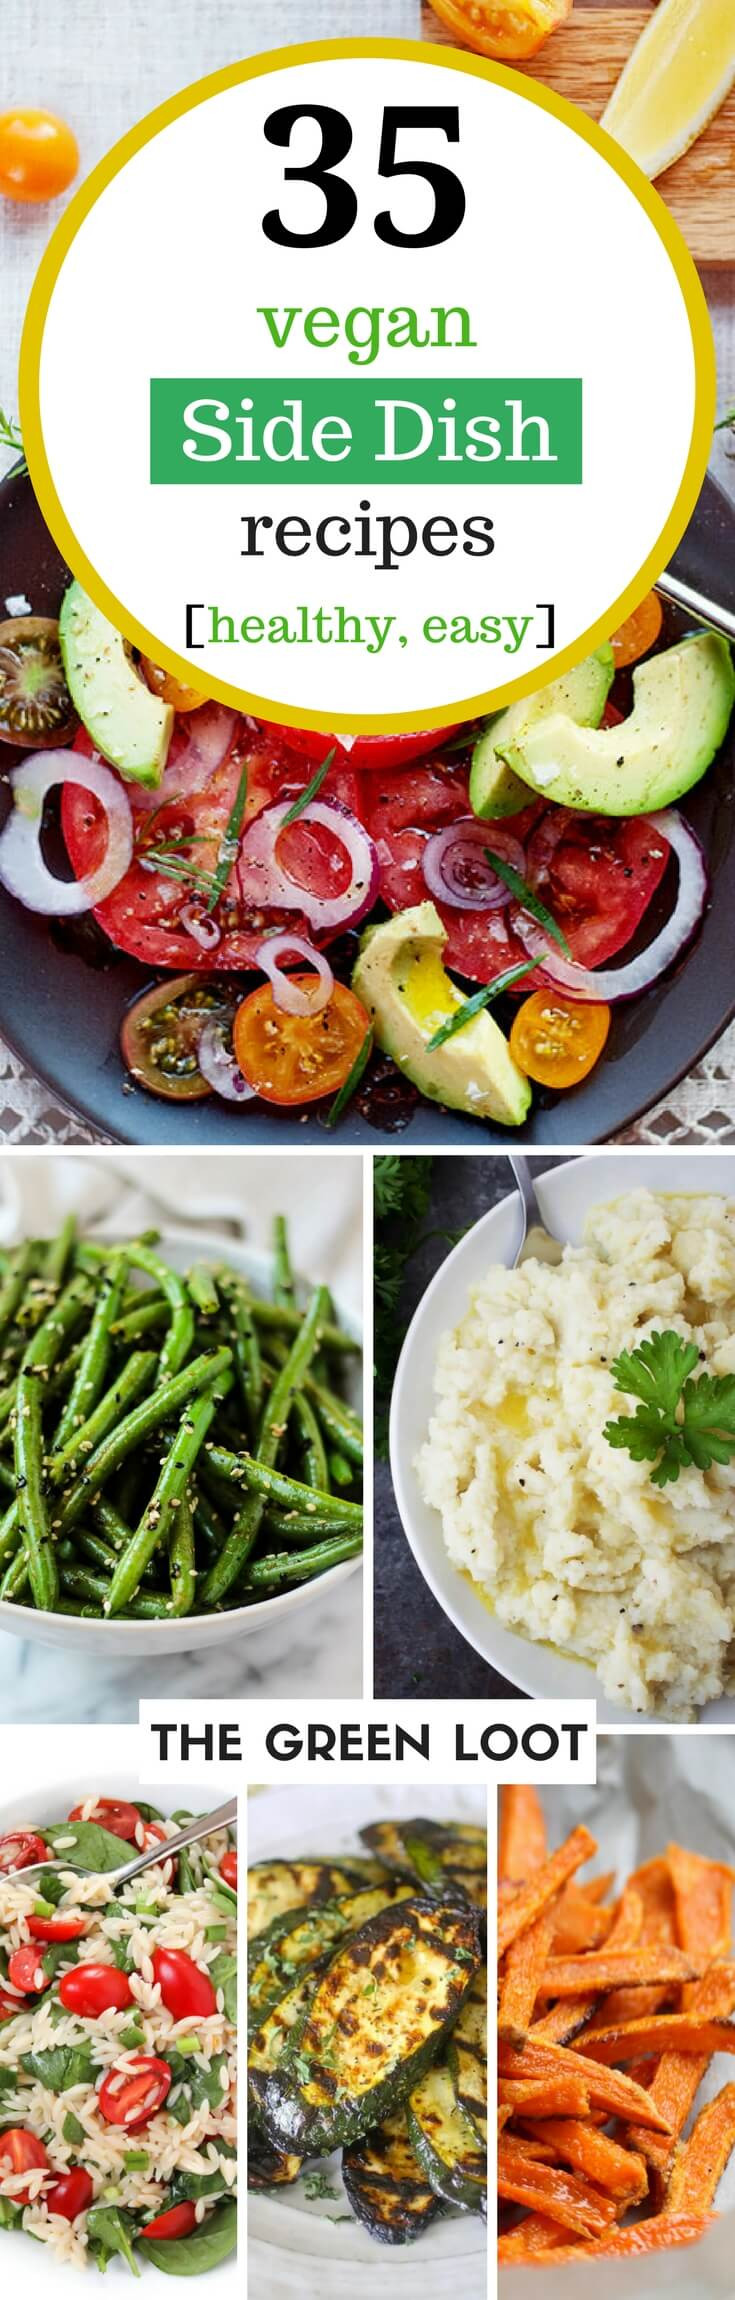 Vegan Side Dishes
 35 Healthy Vegan Side Dish Recipes for an Easy Dinner